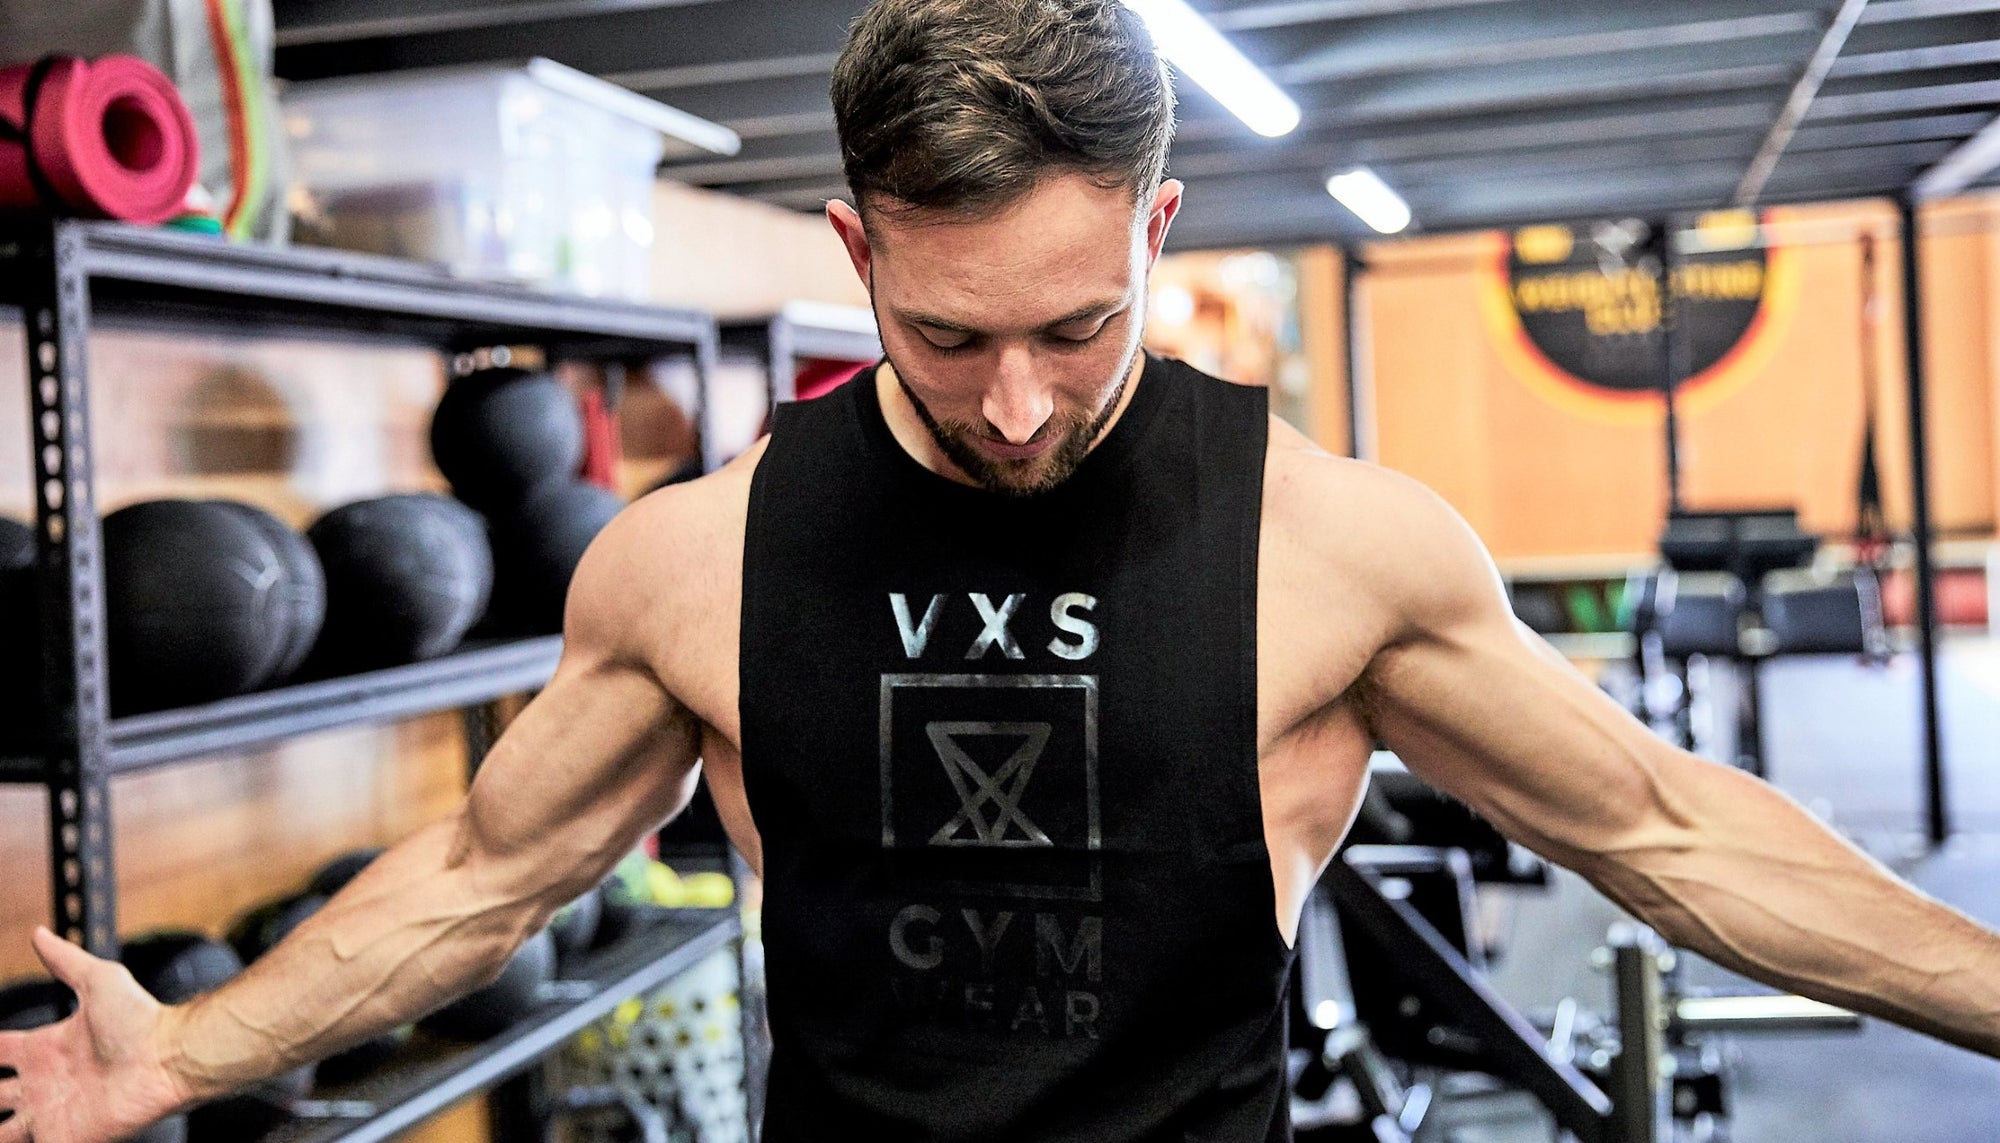 Men's Gym Vests and Tanks - Gym & Fitness Clothing - VXS Gym Wear - VXS GYM  WEAR